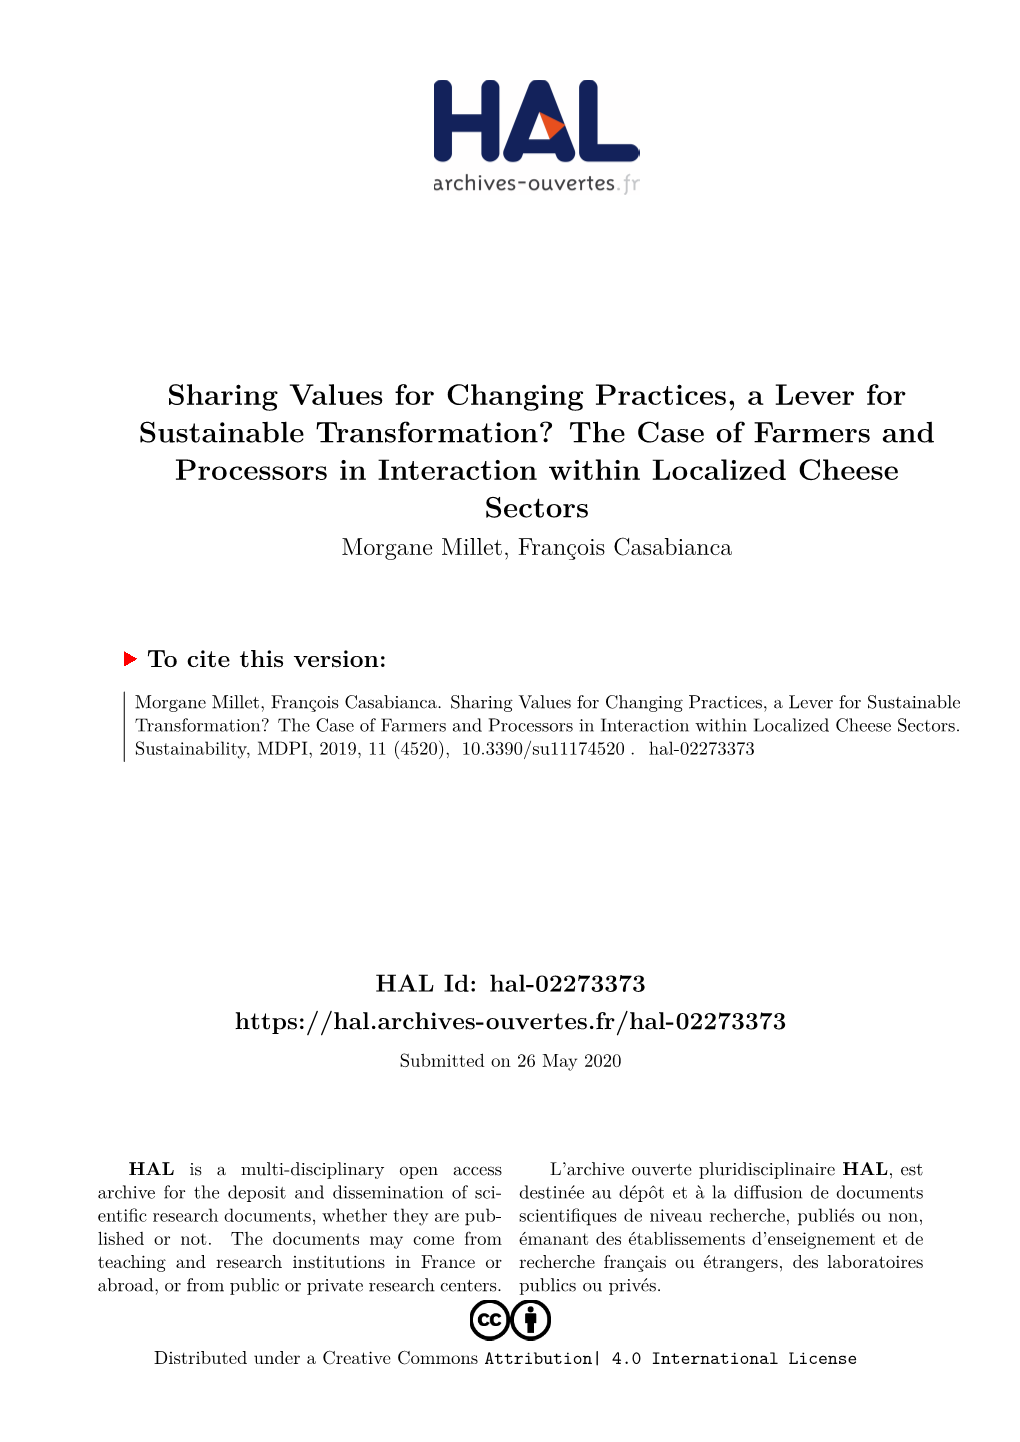 Sharing Values for Changing Practices, a Lever for Sustainable